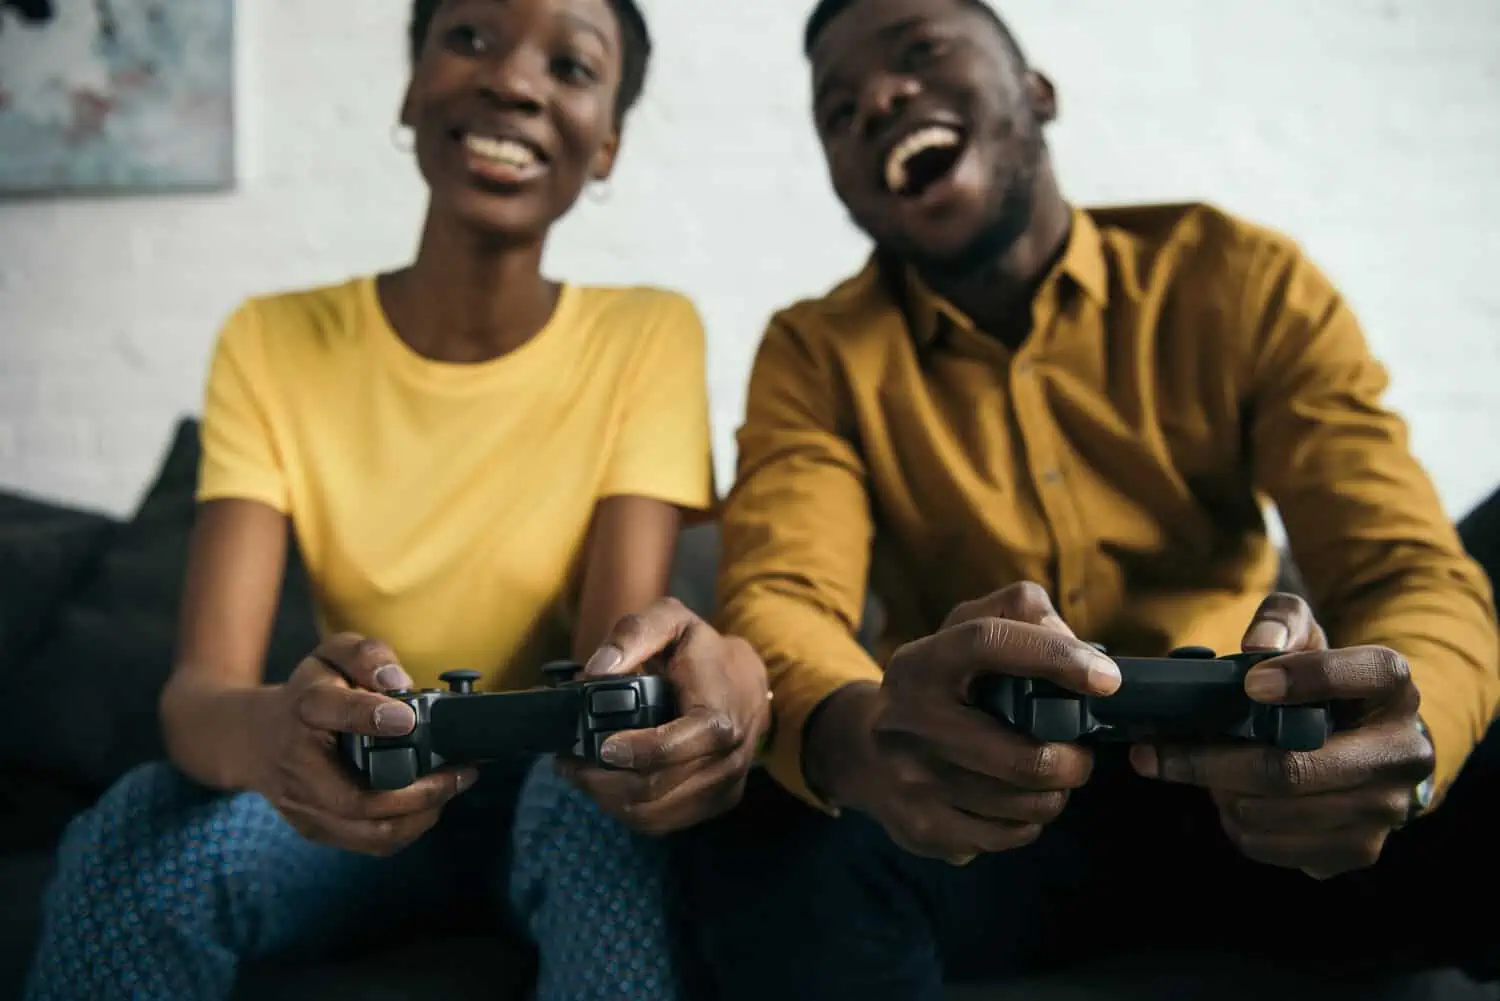 Two young adult in yellow playing video games